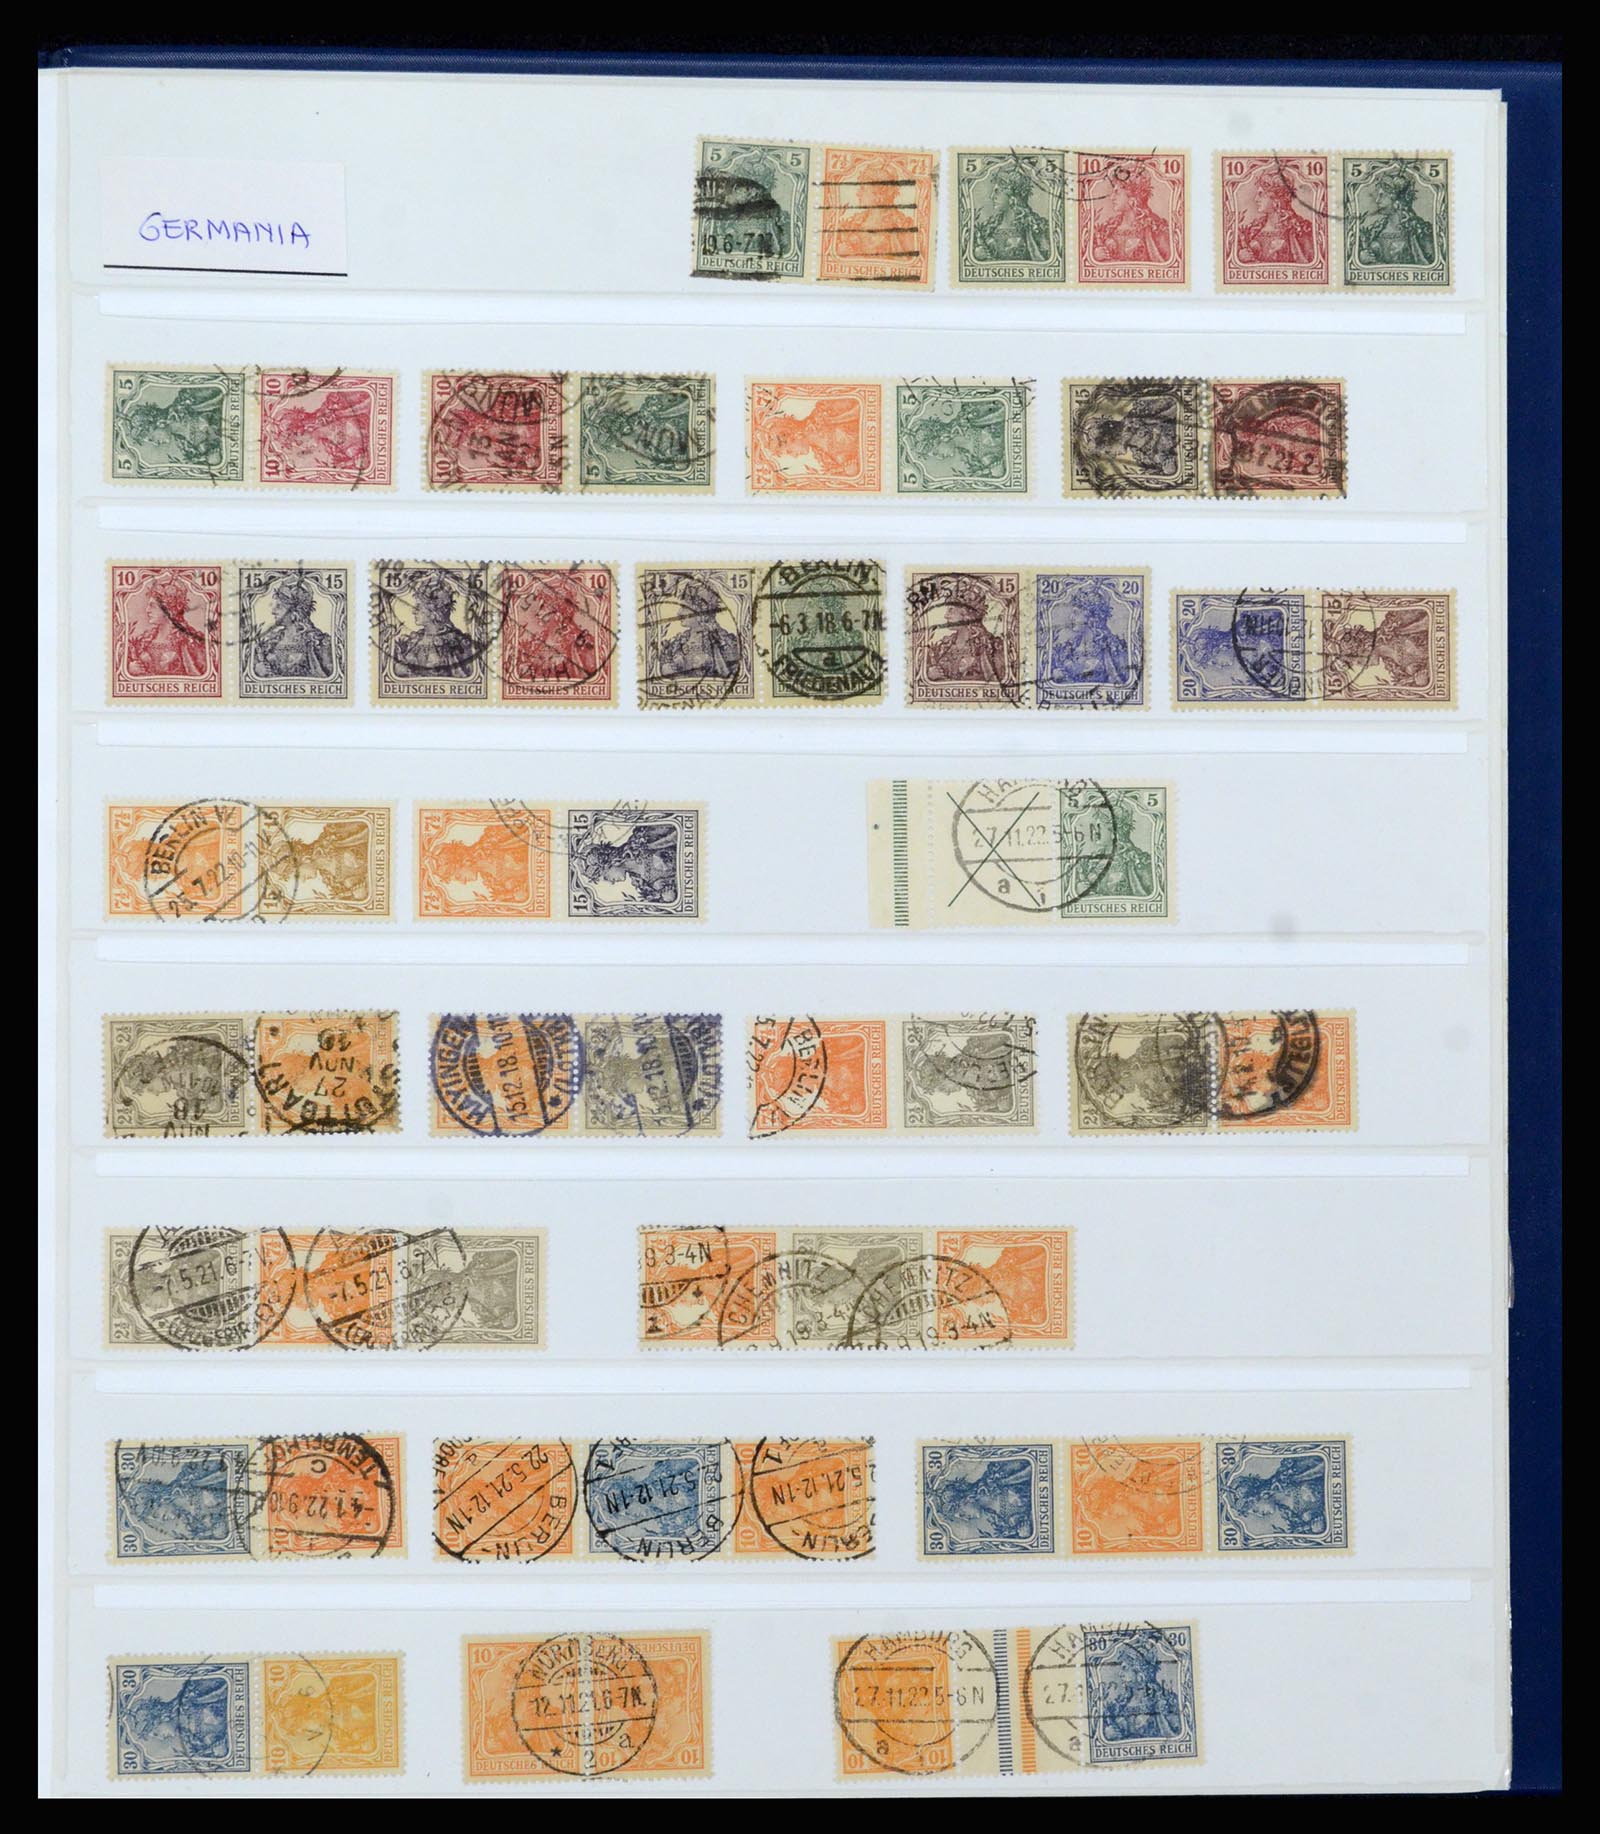 37190 001 - Stamp collection 37190 Germany combinations 1912-1991.